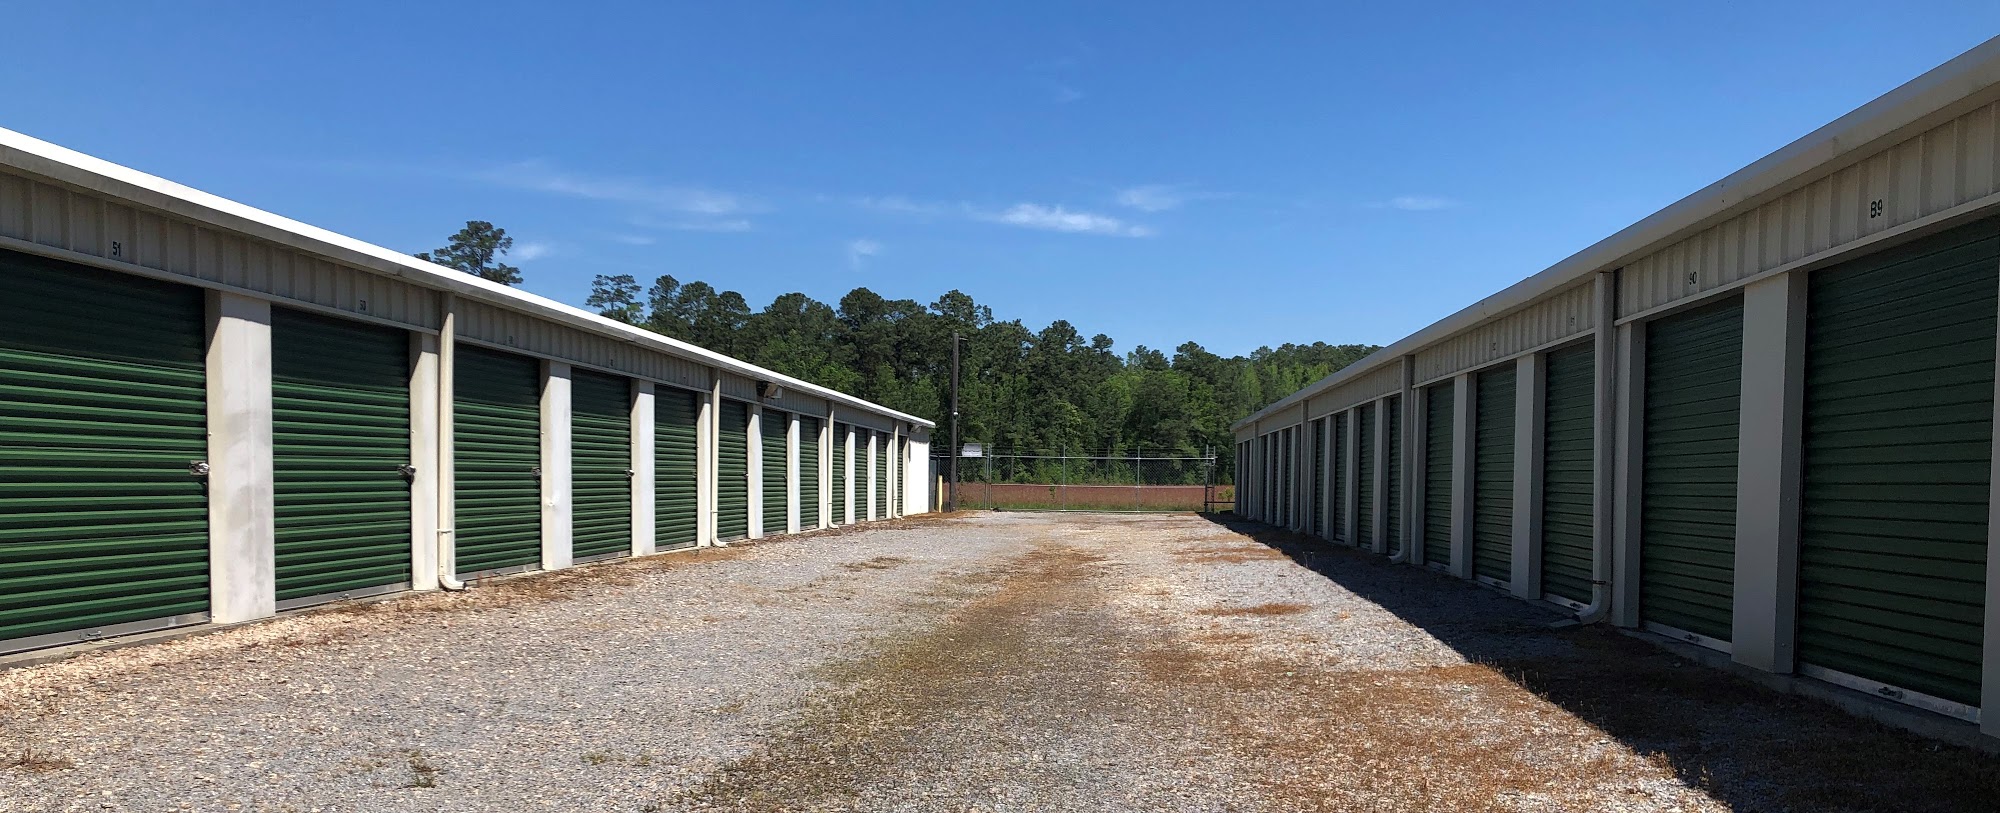 Tigers Eye Storage @ Florence South Irby